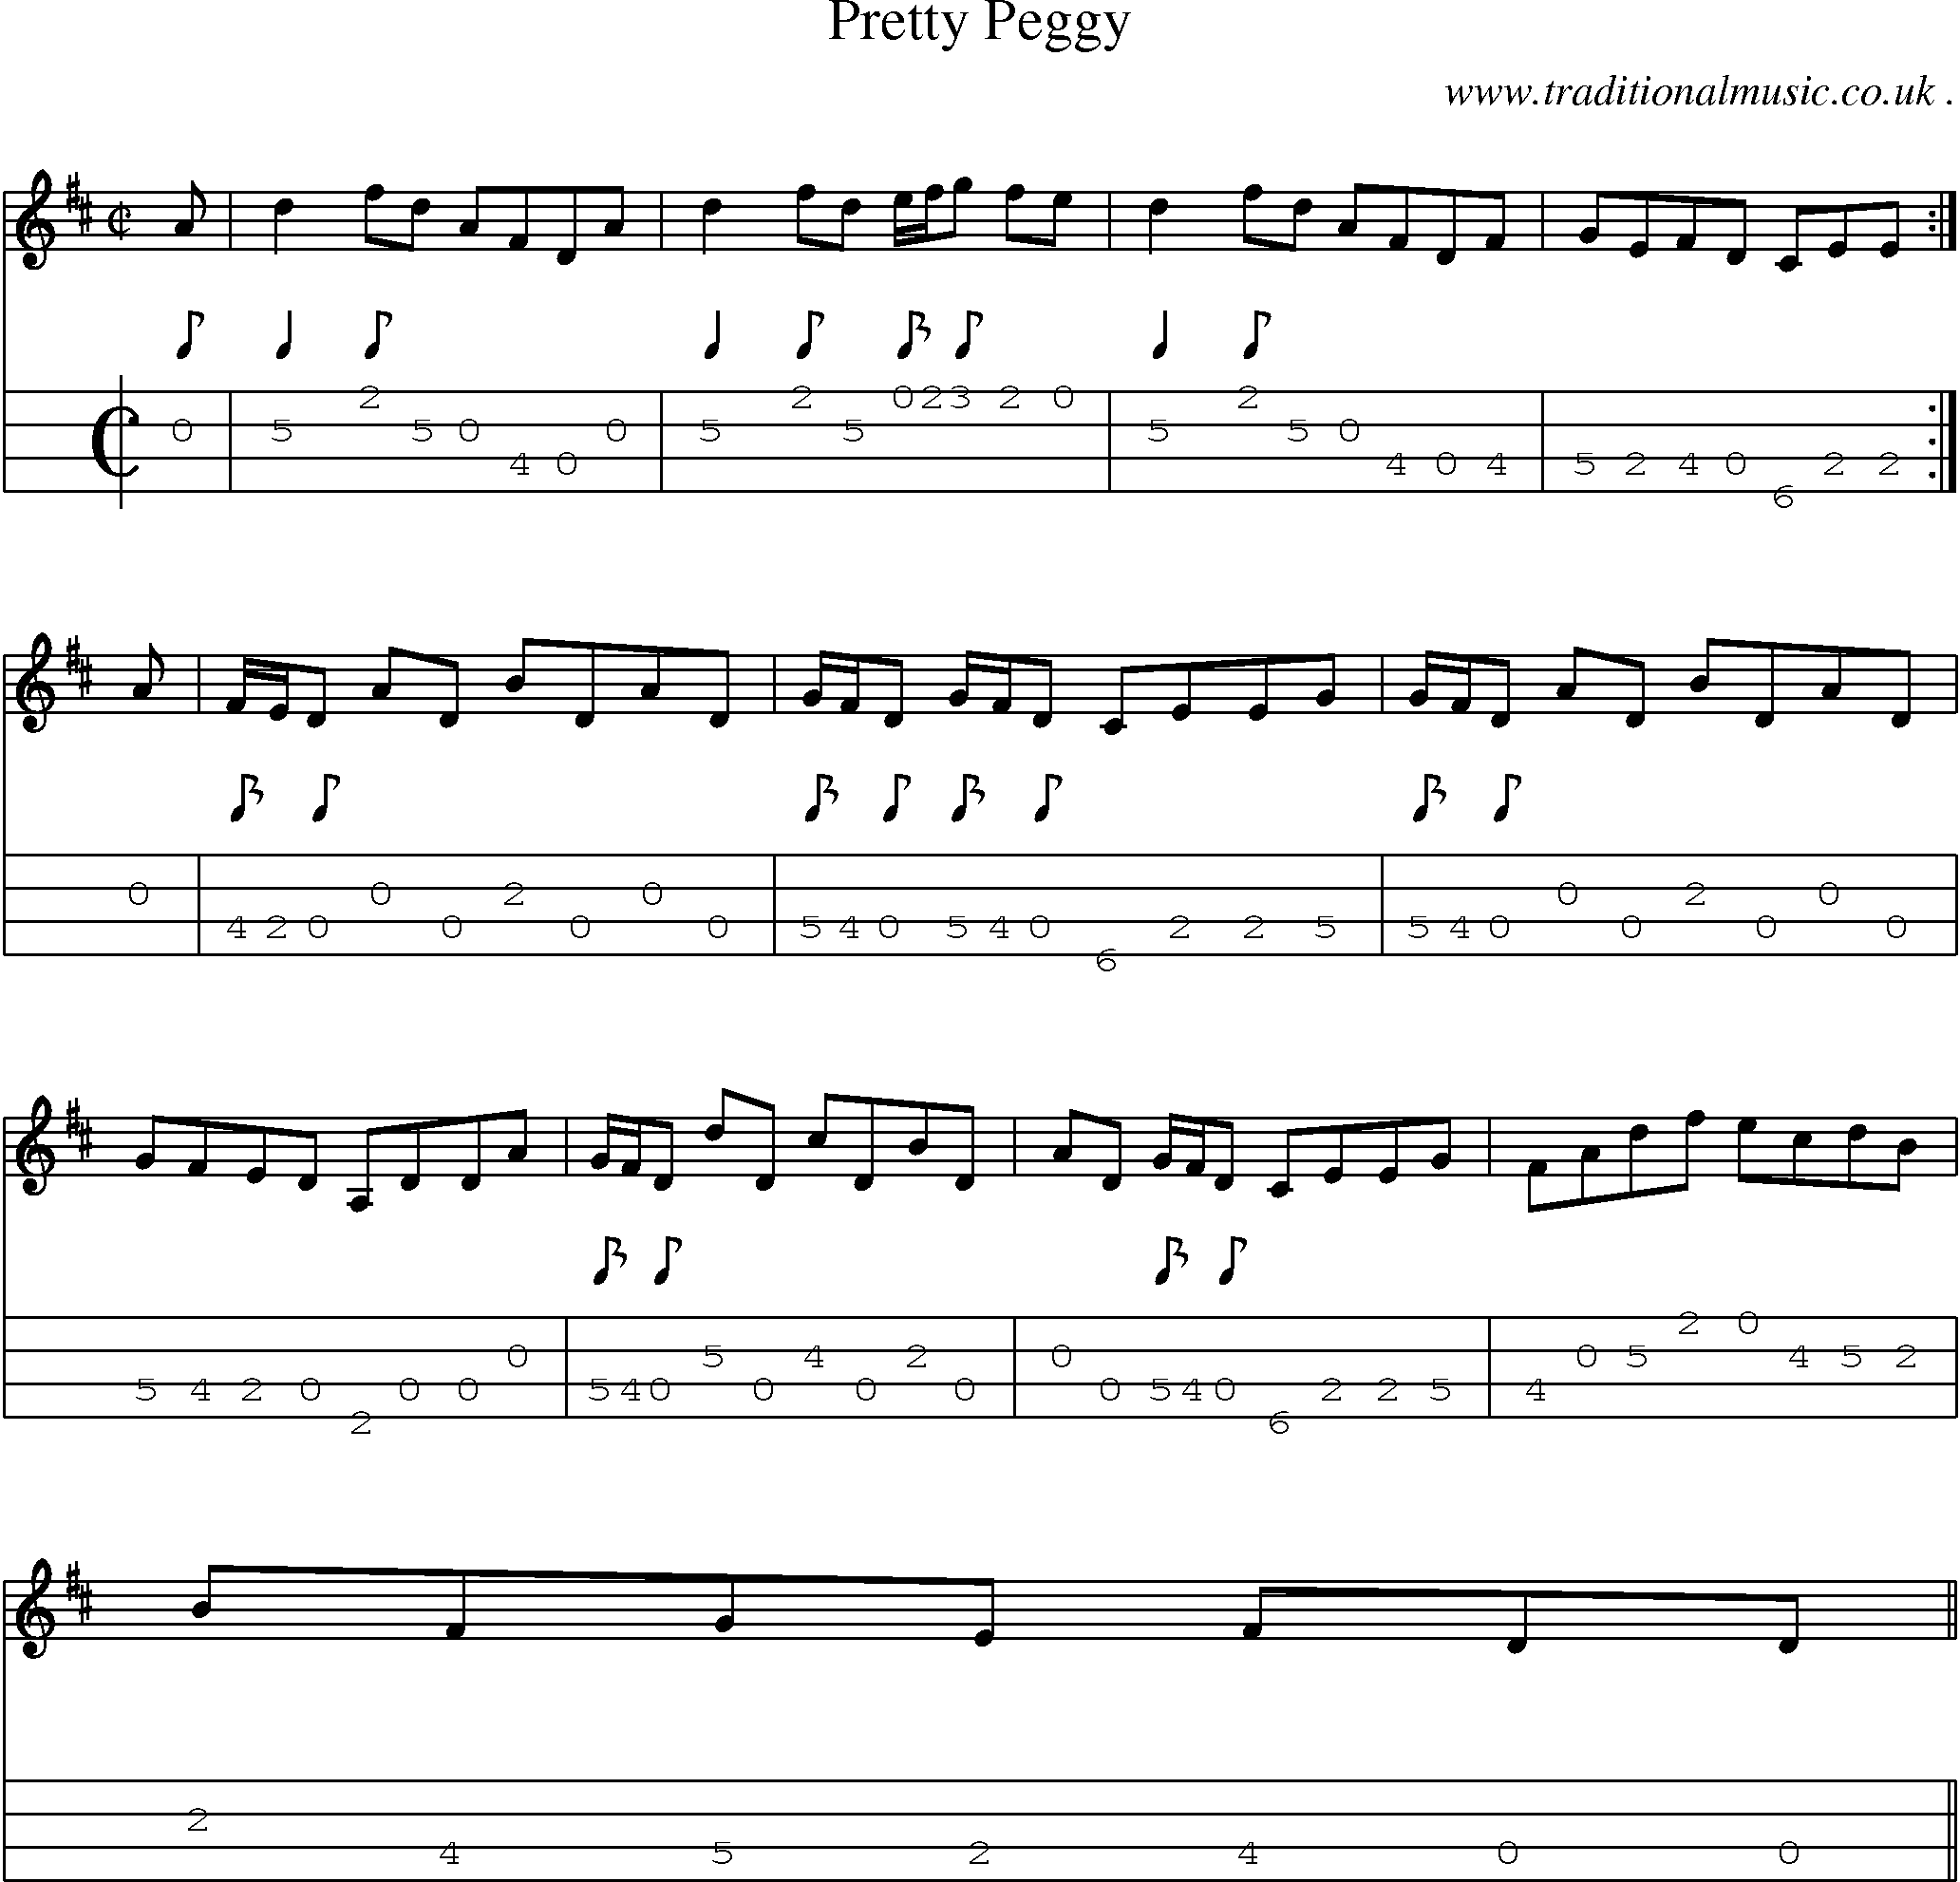 Sheet-music  score, Chords and Mandolin Tabs for Pretty Peggy 